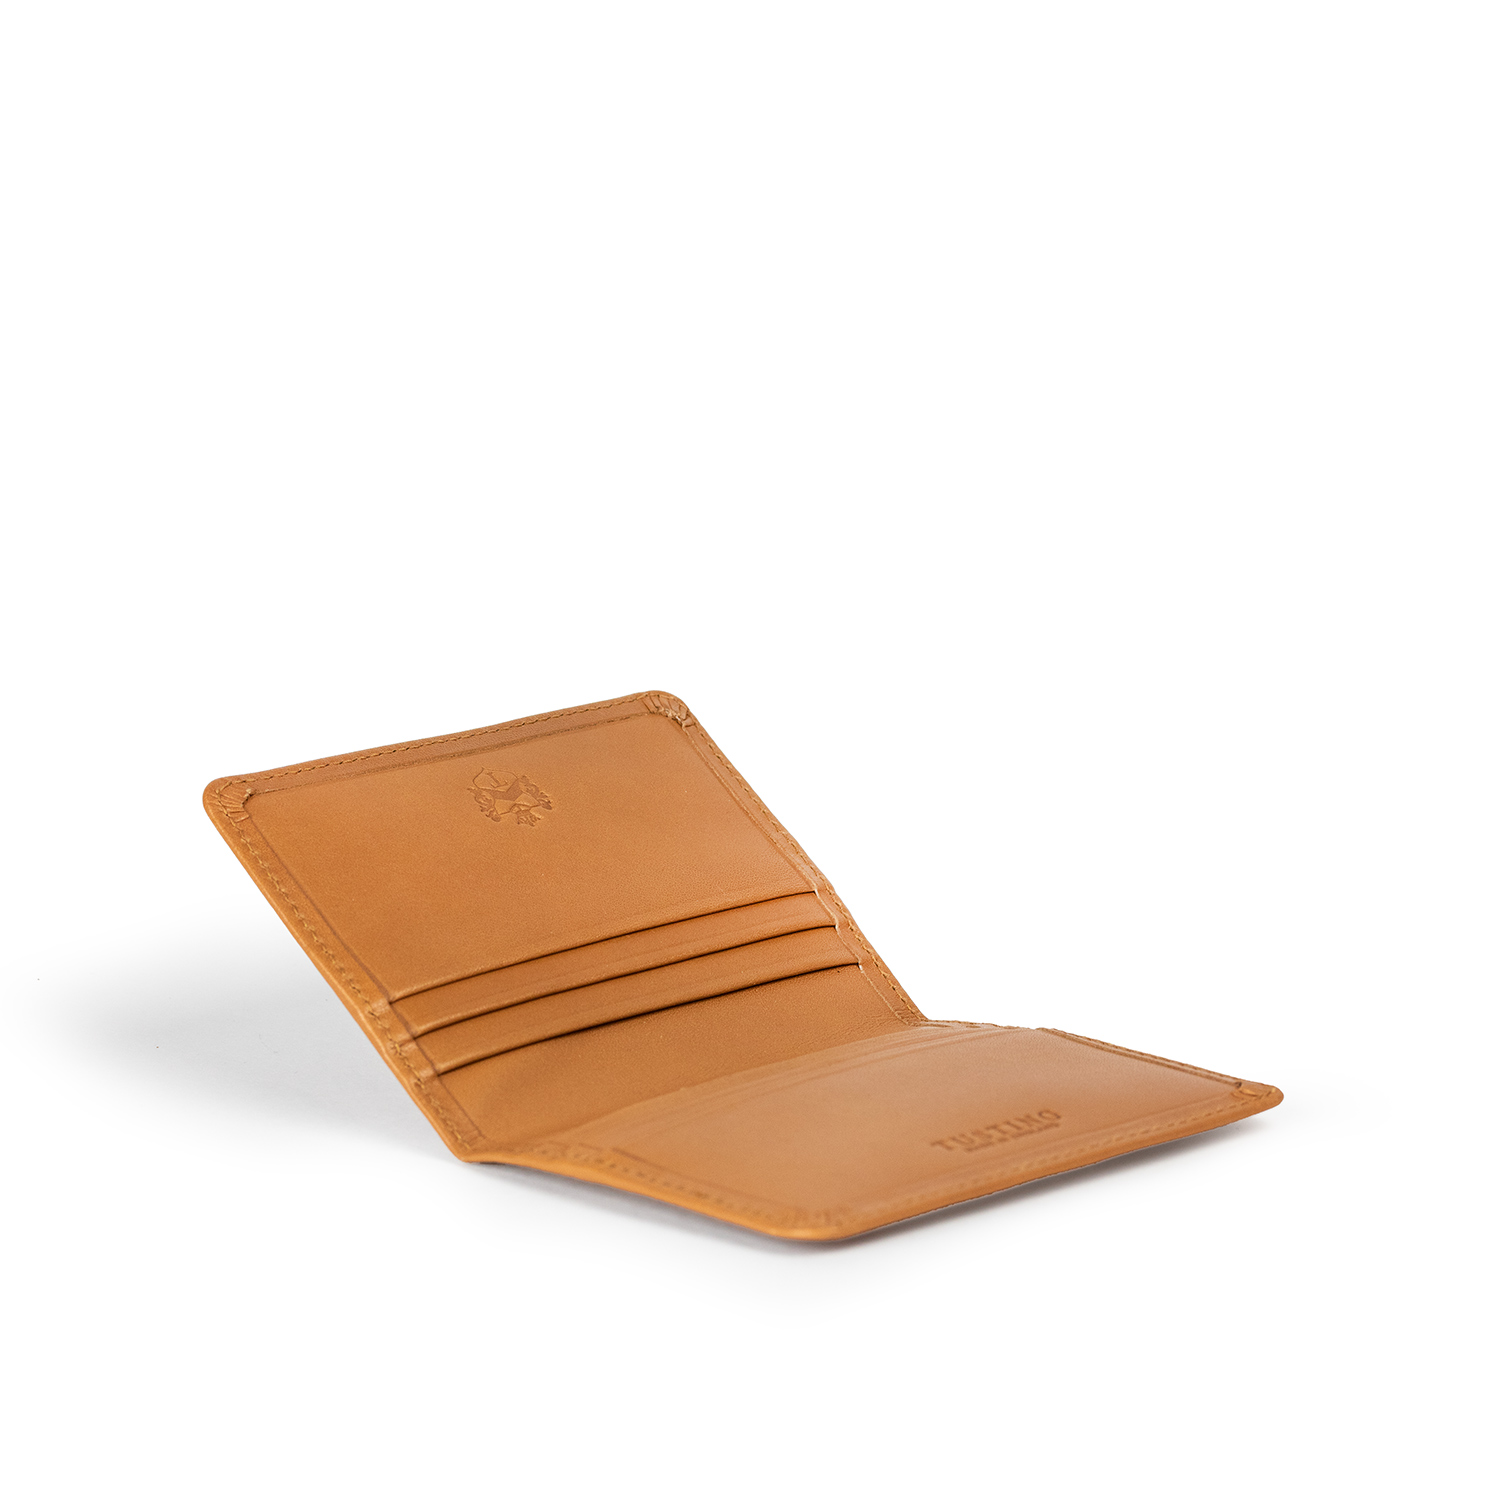 English Tan Leather Card Holder: Your Front Pocket Companion - Popov Leather®